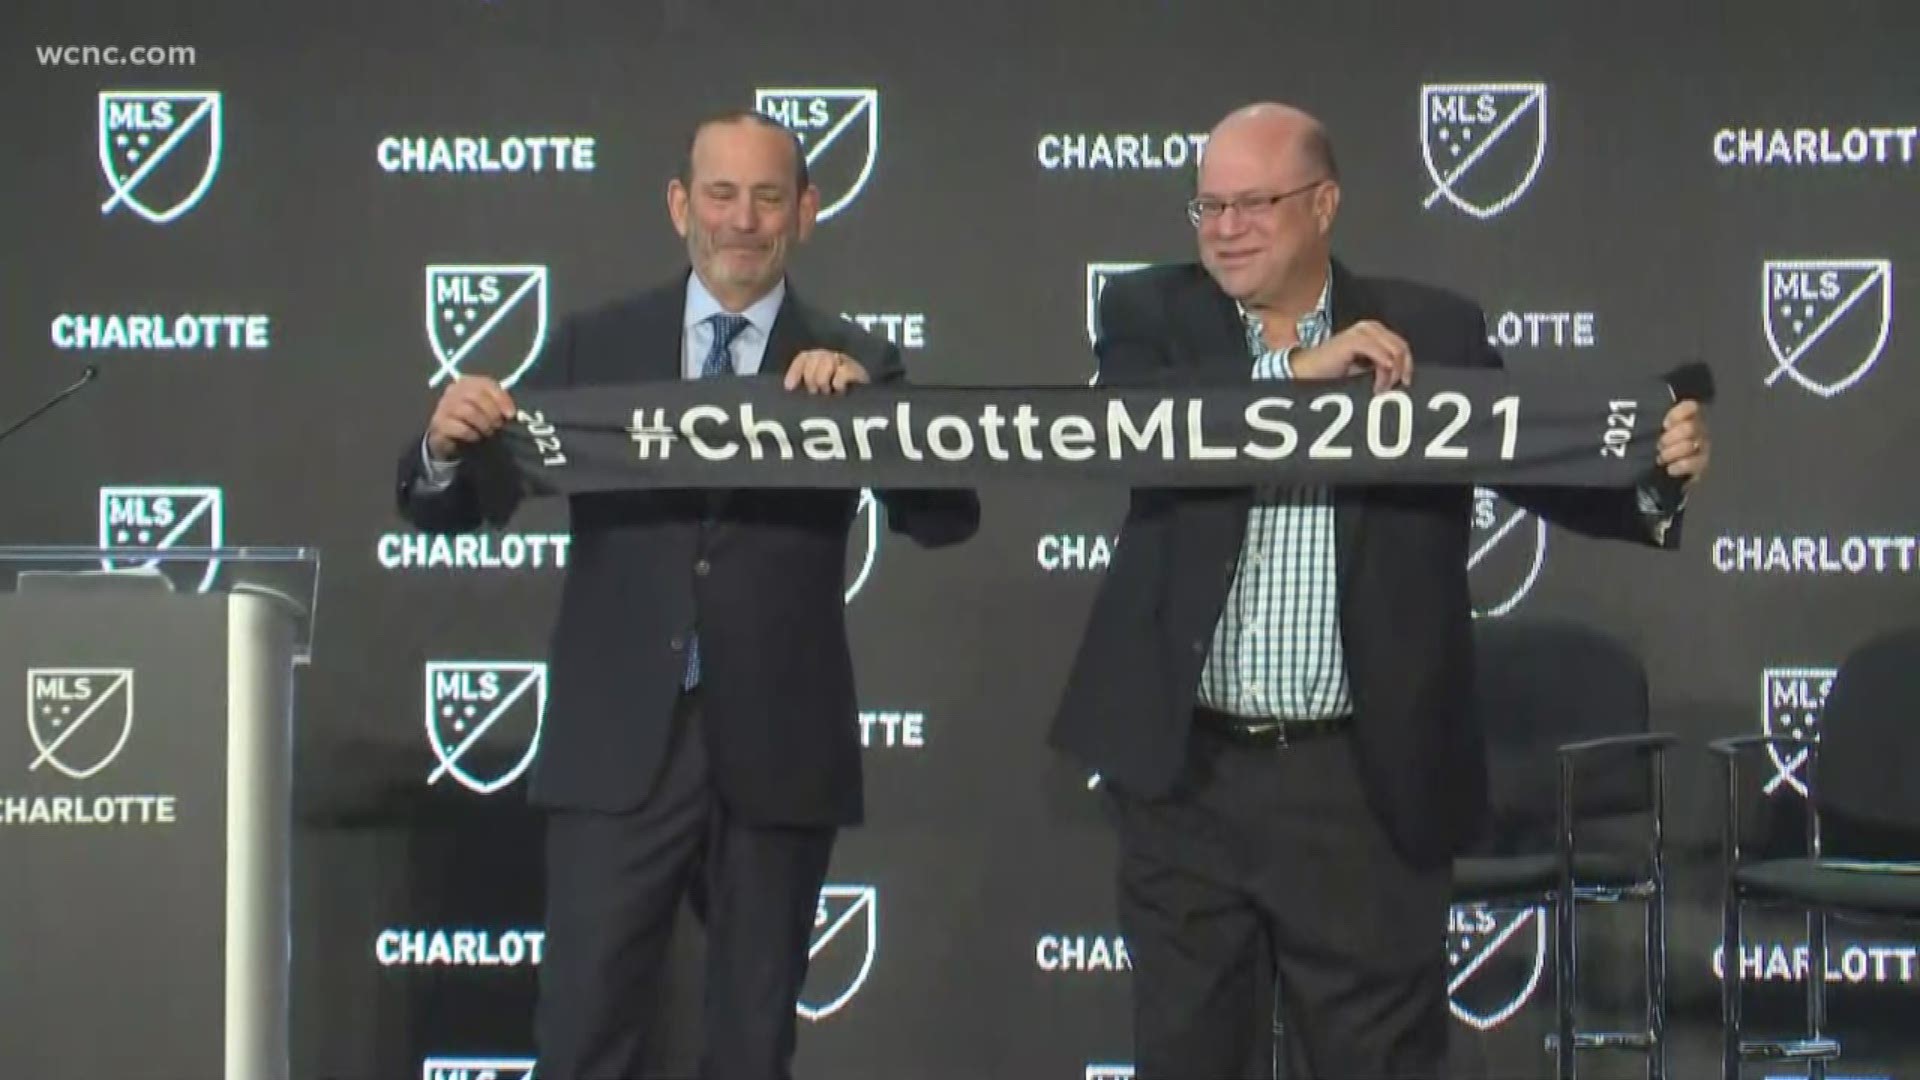 Major League Soccer officially welcomed Charlotte as its 30th league team Tuesday, led by owner David Tepper.